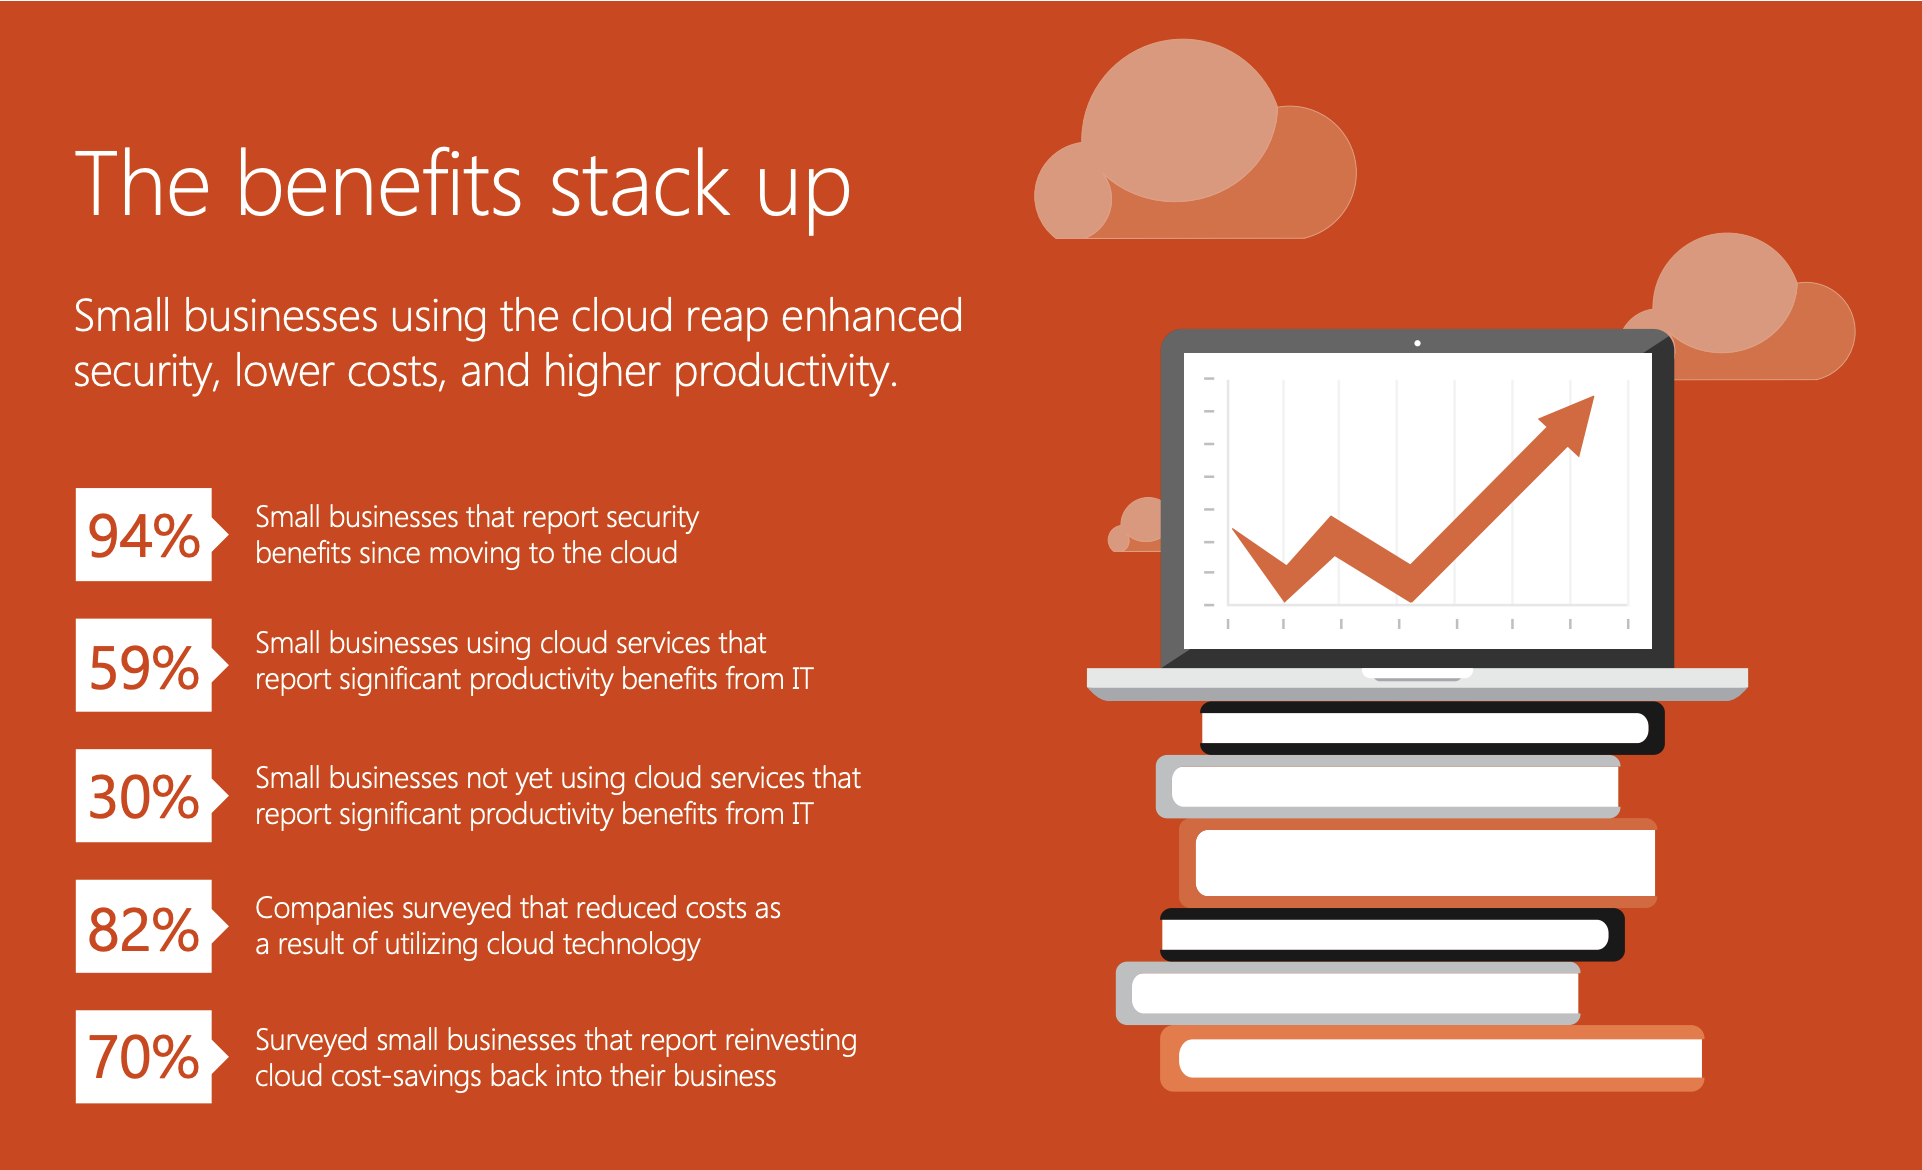 Microsoft - Small businesses using the cloud see lower costs